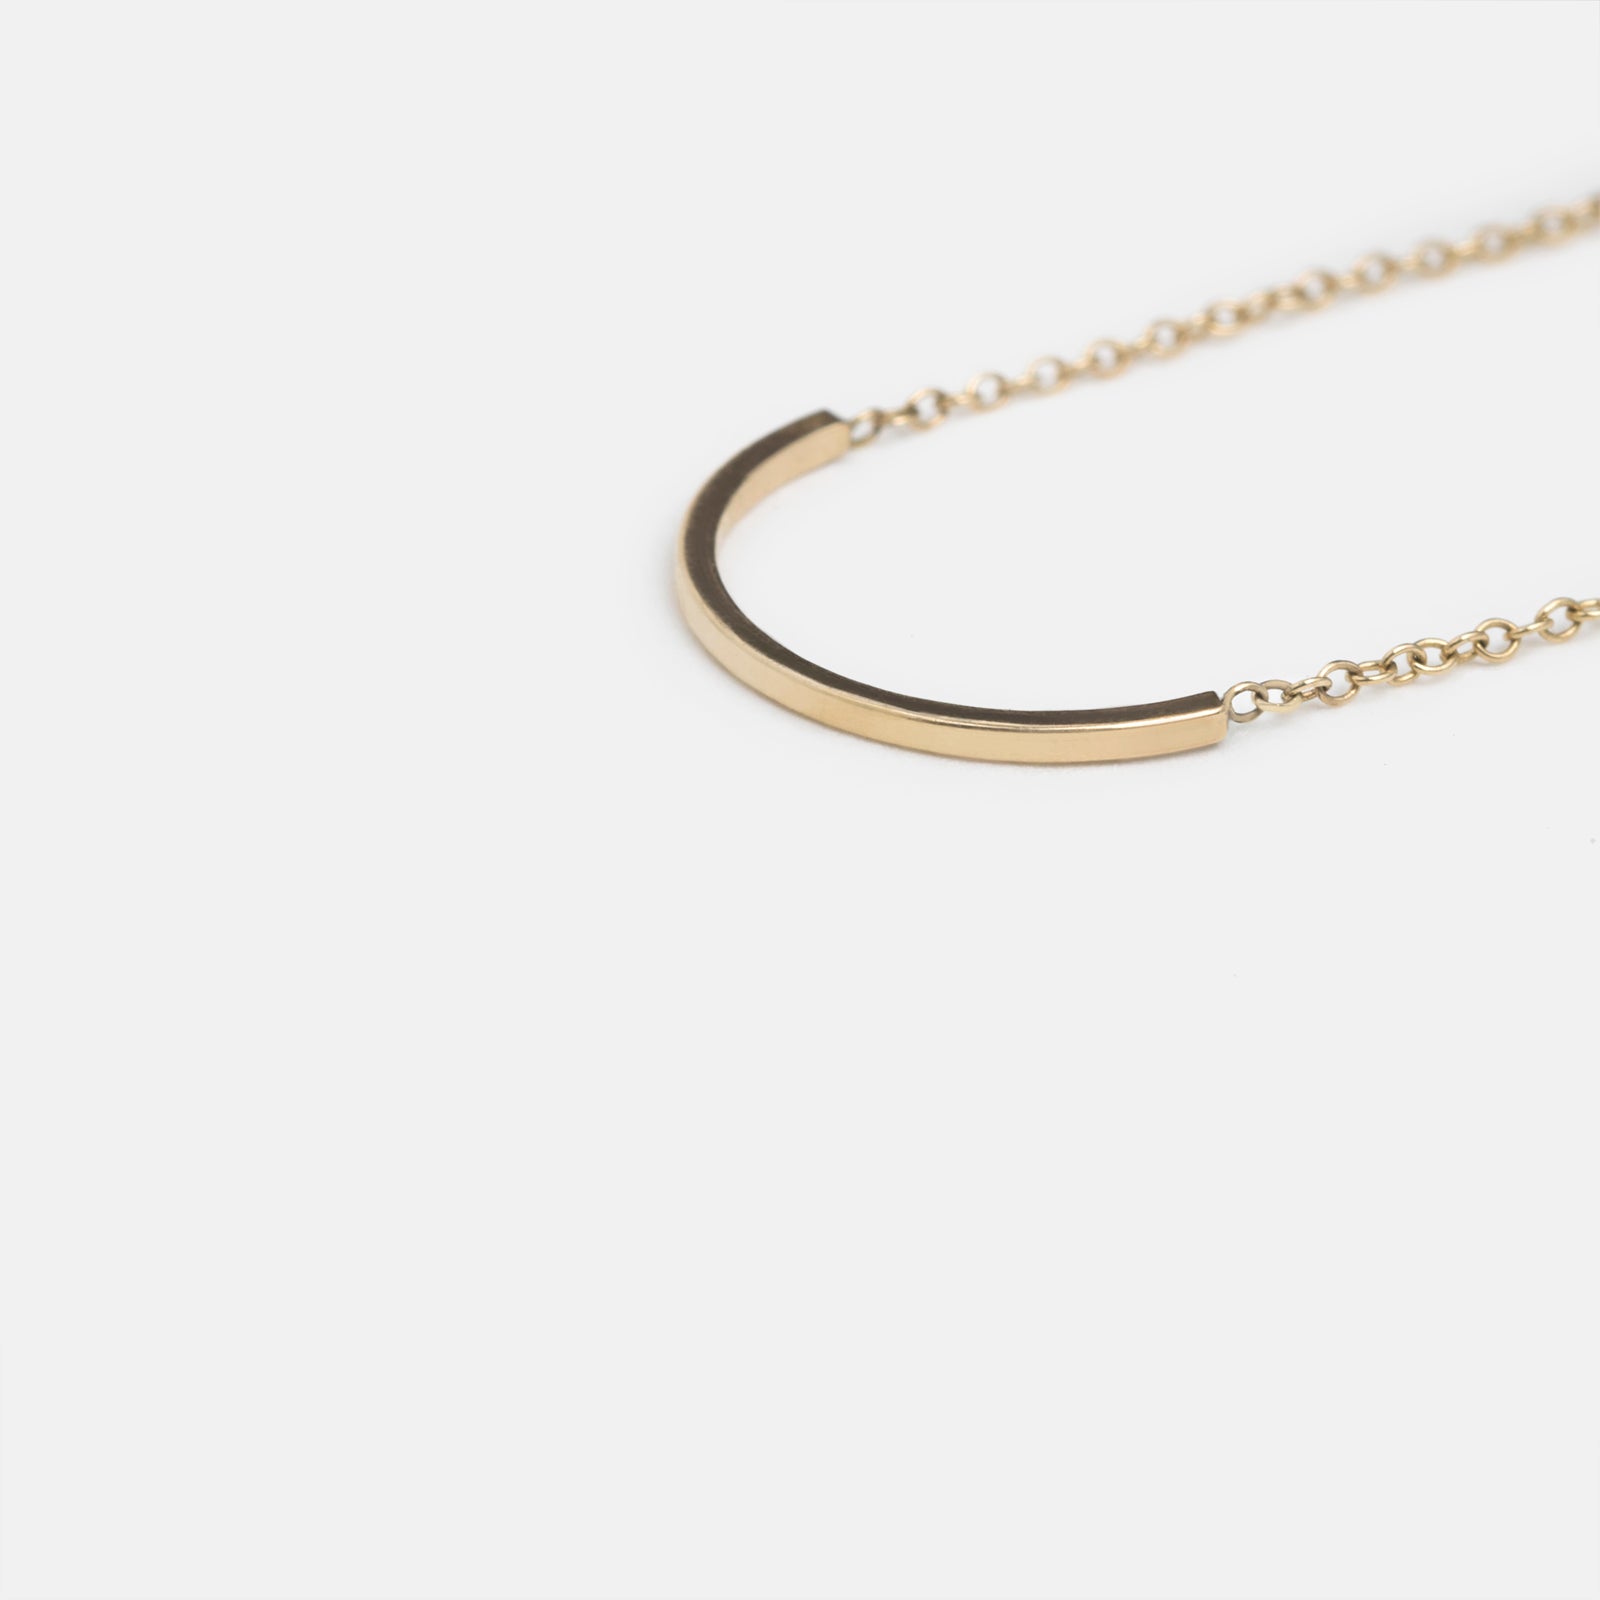 Uva Handmade Necklace in 14k Gold By SHW Fine Jewelry NYC